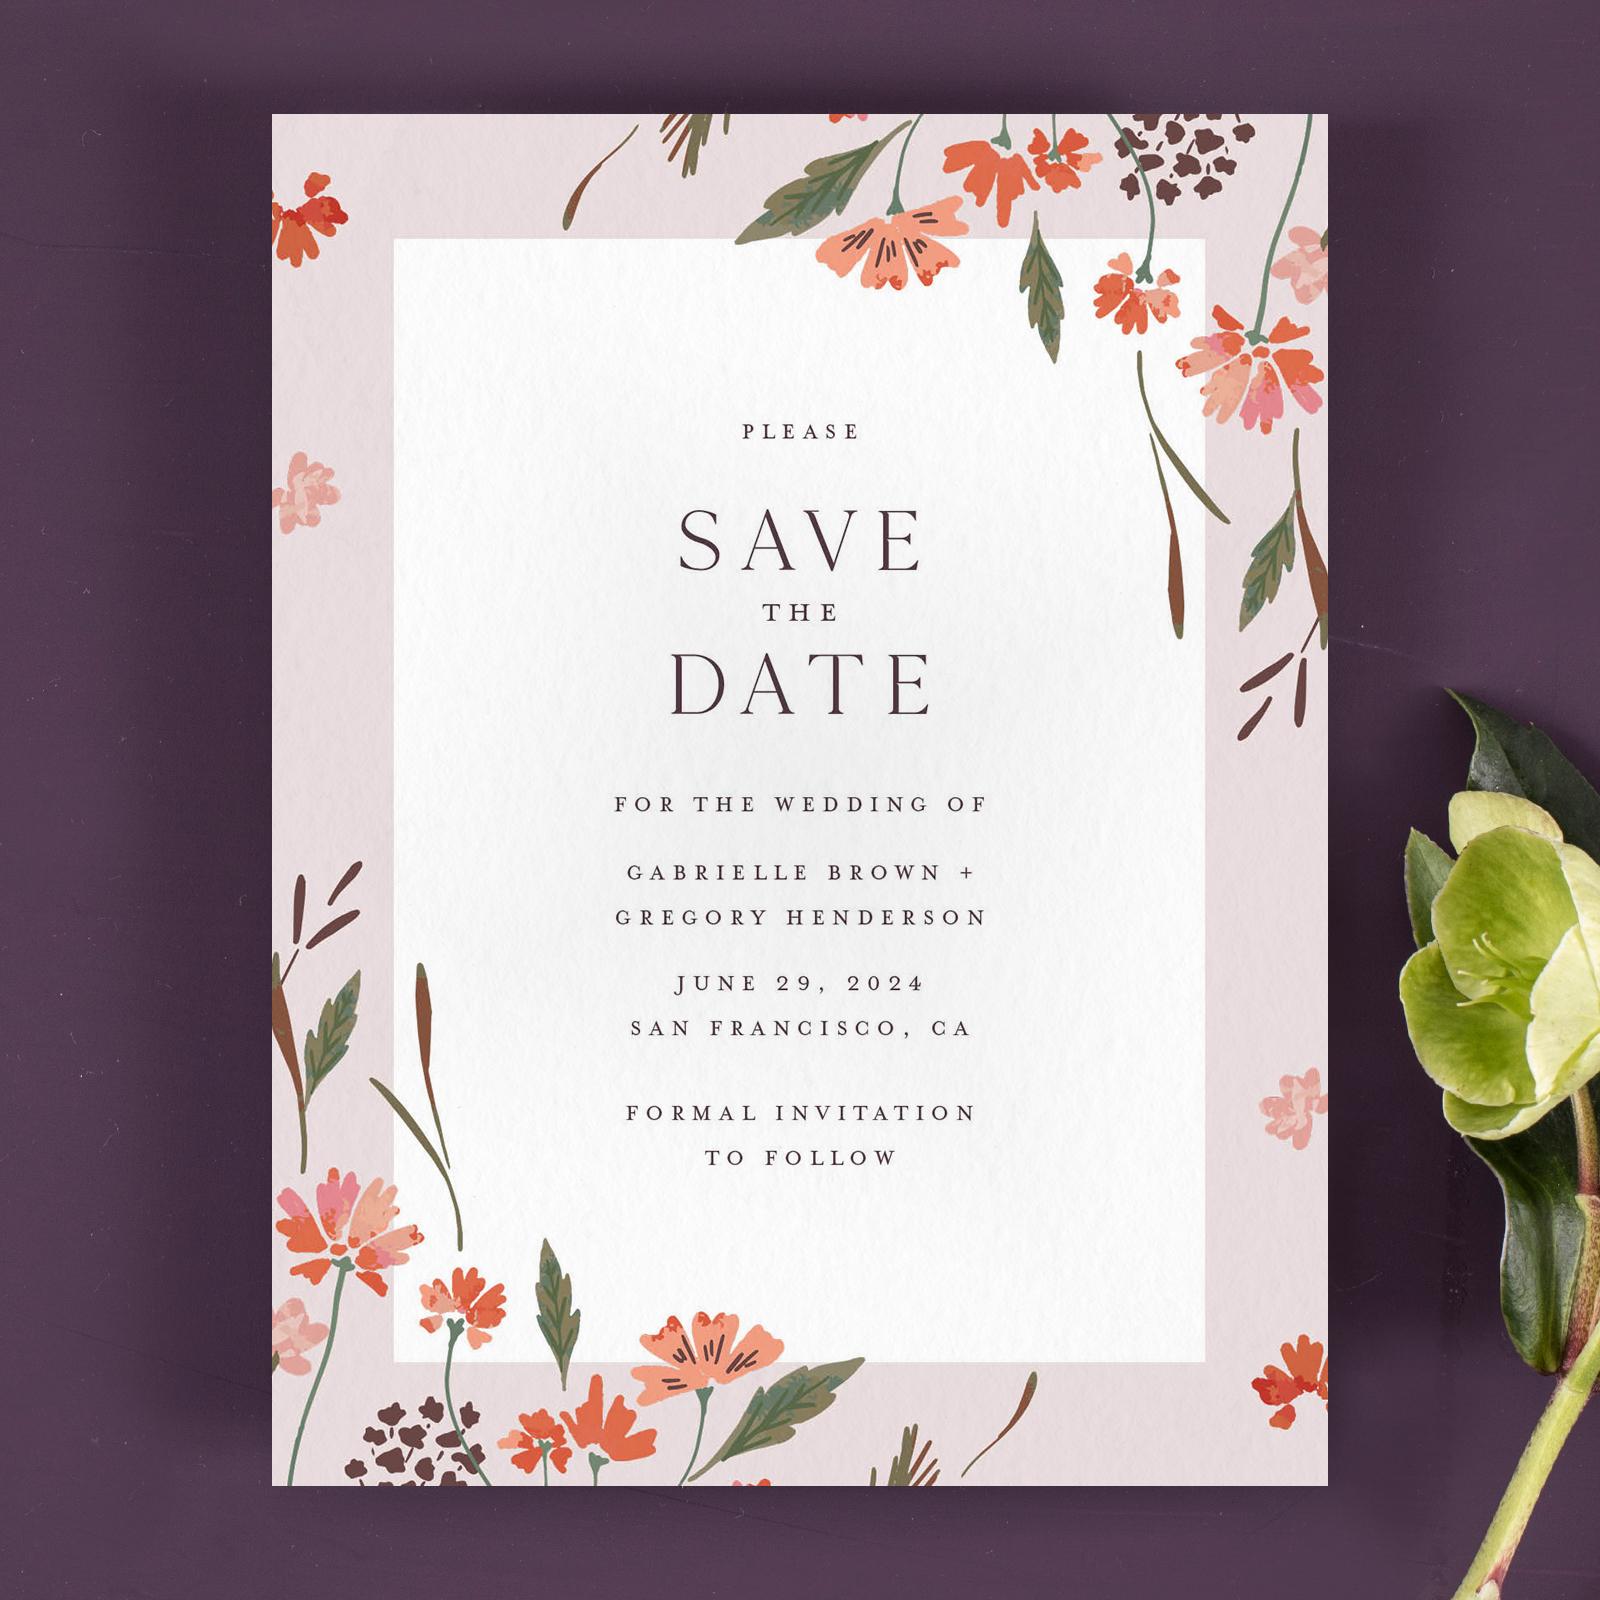 Addressing Save the Dates: A Guide - Zola Expert Wedding Advice